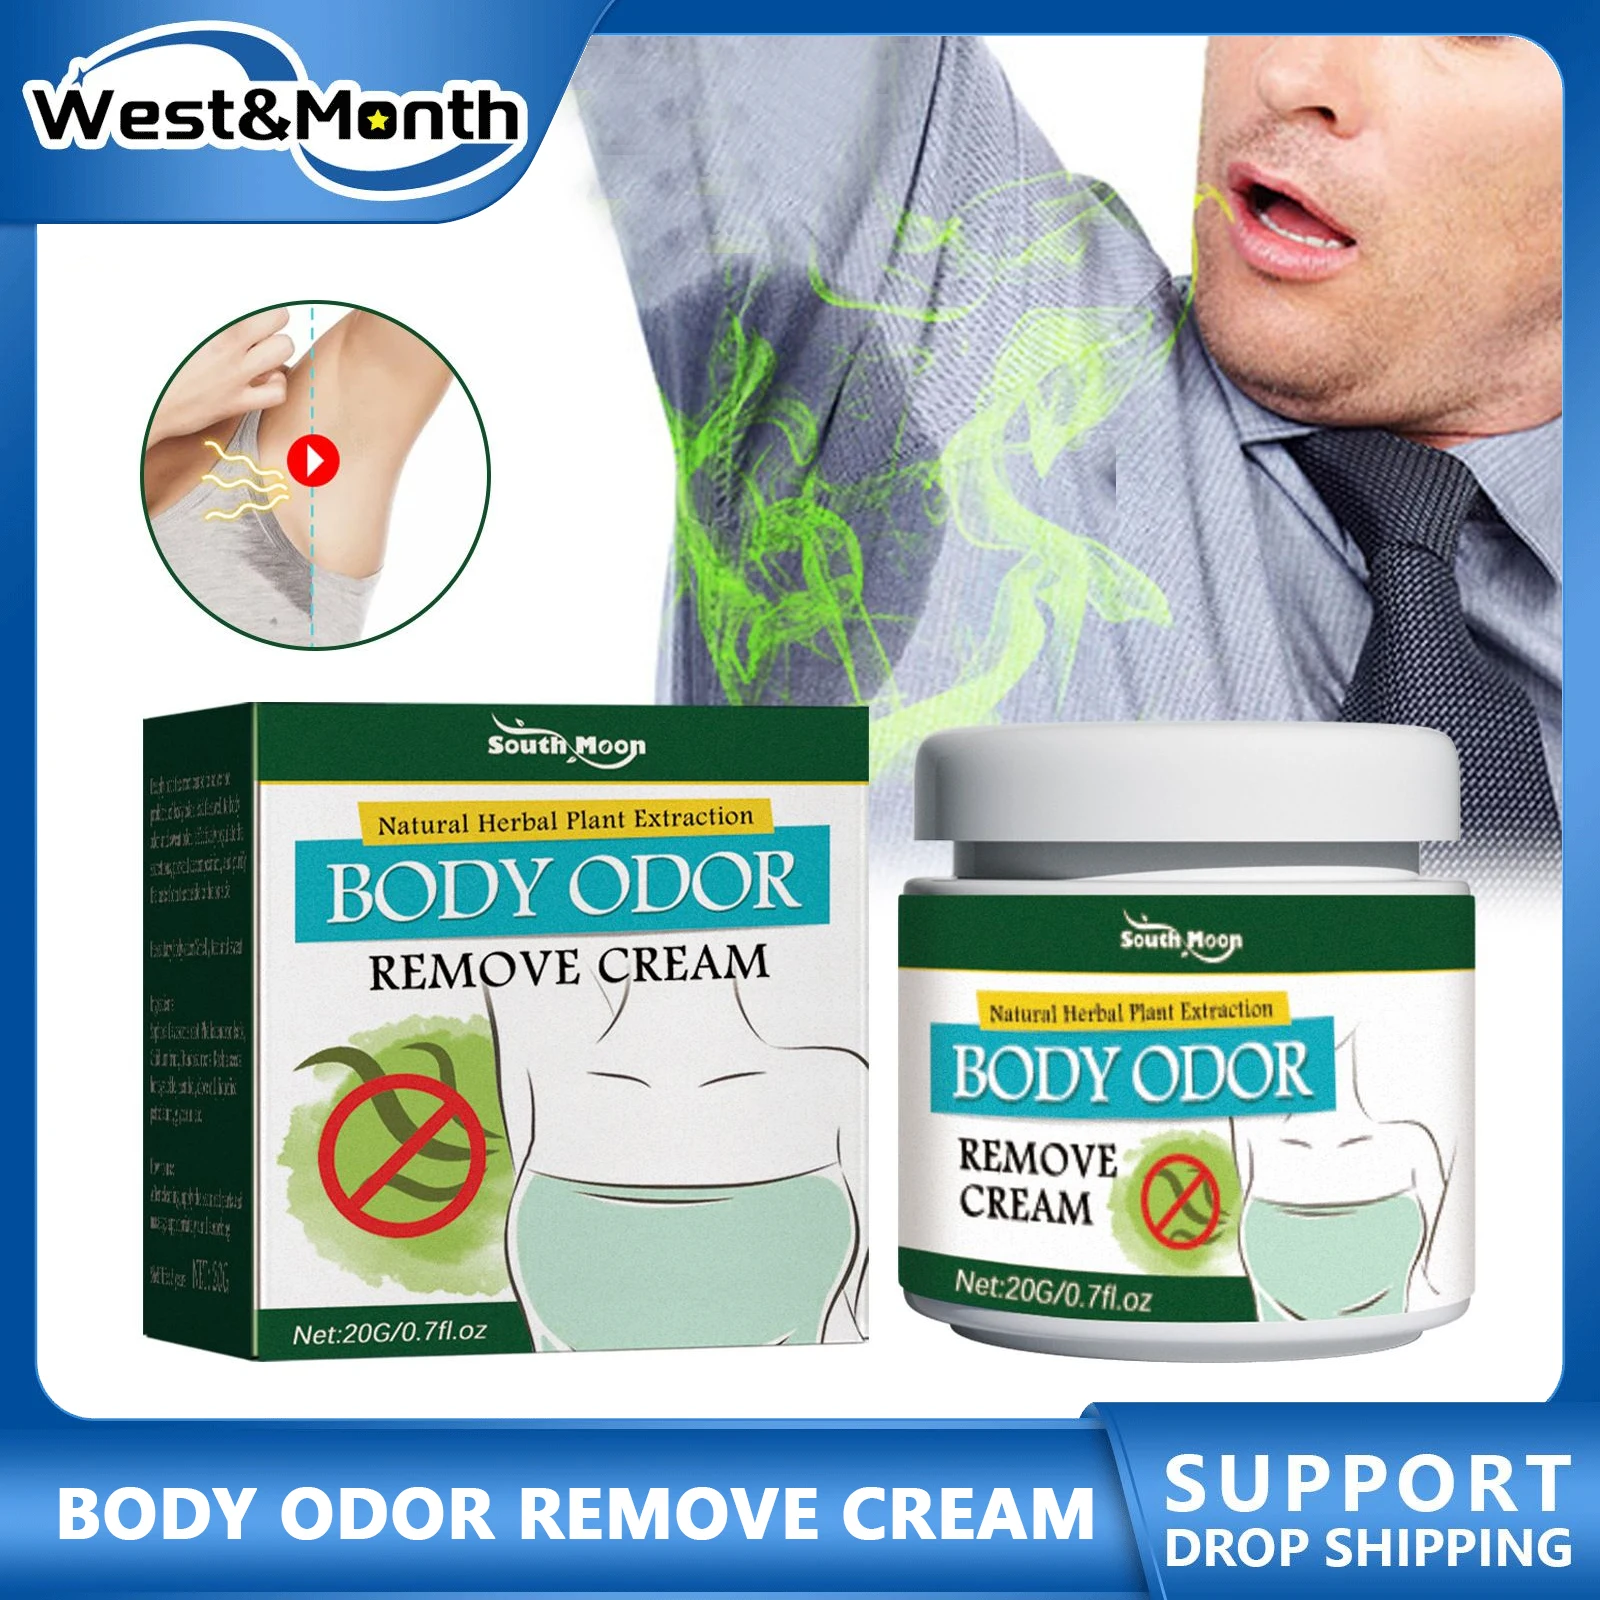 

Body Odor Remove Cream Underarm Bad Smell Sweating Removal Armpit Refreshing Deodorant Antiperspirant Cream Body Cleaning Care